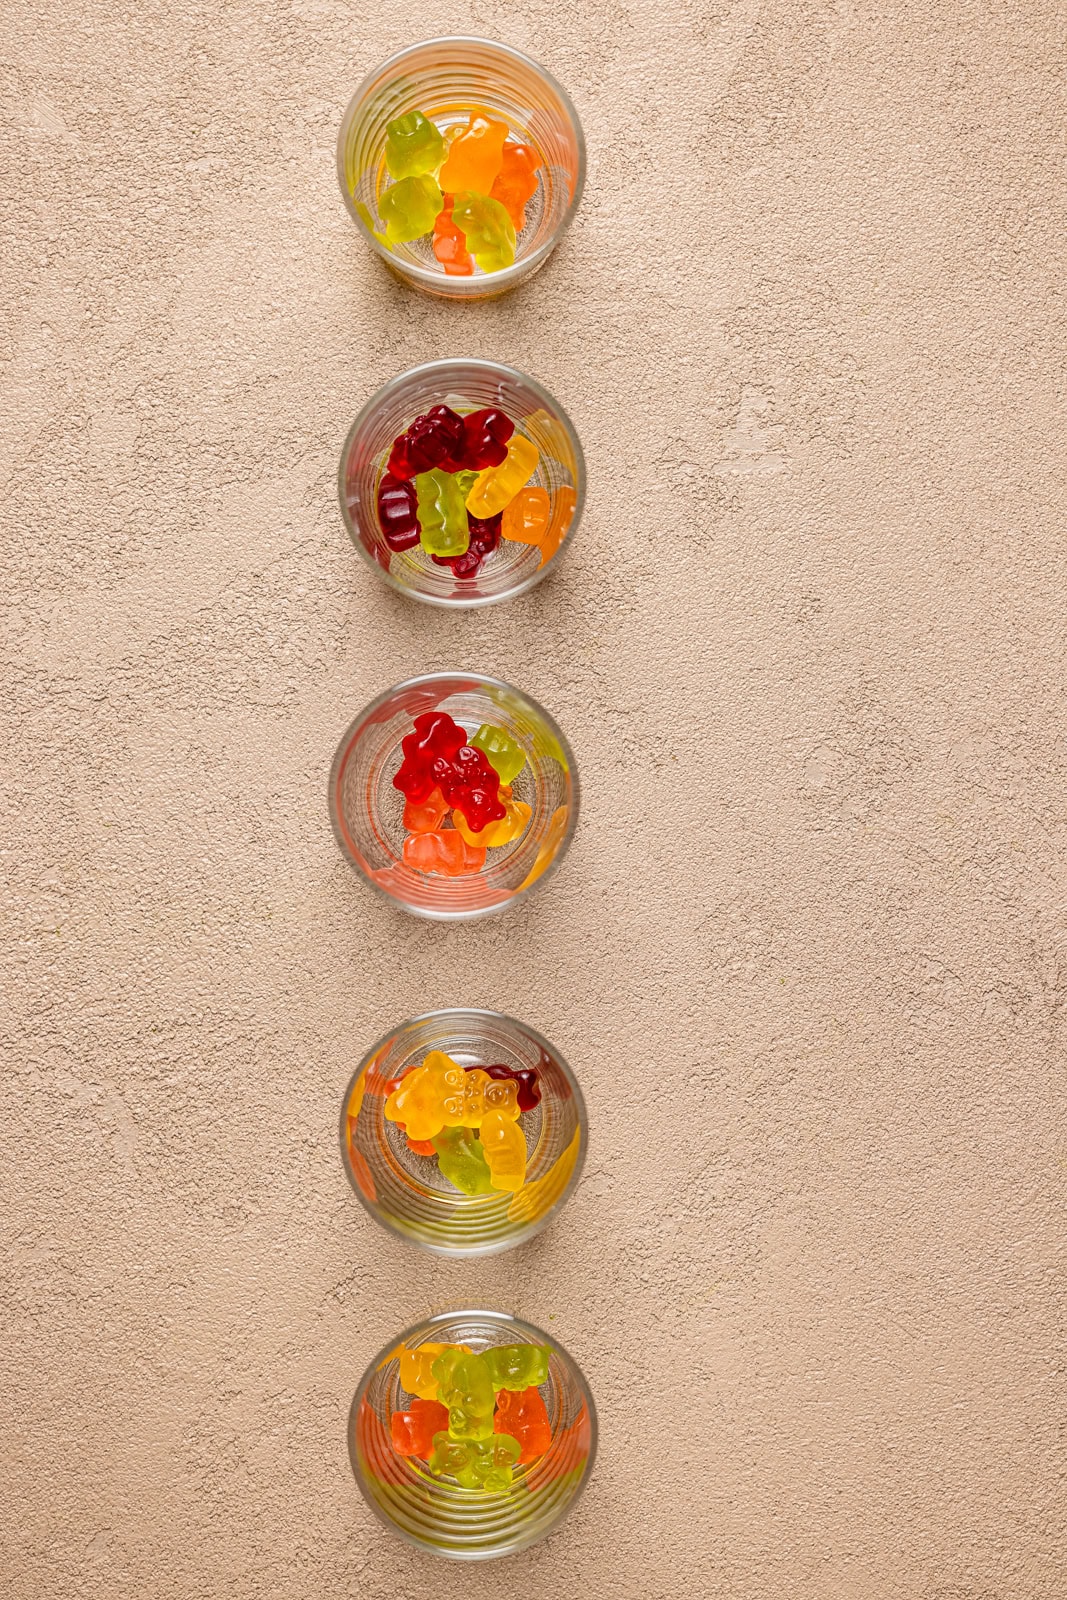 Shot glasses lined up on a table with gummy bears inside.